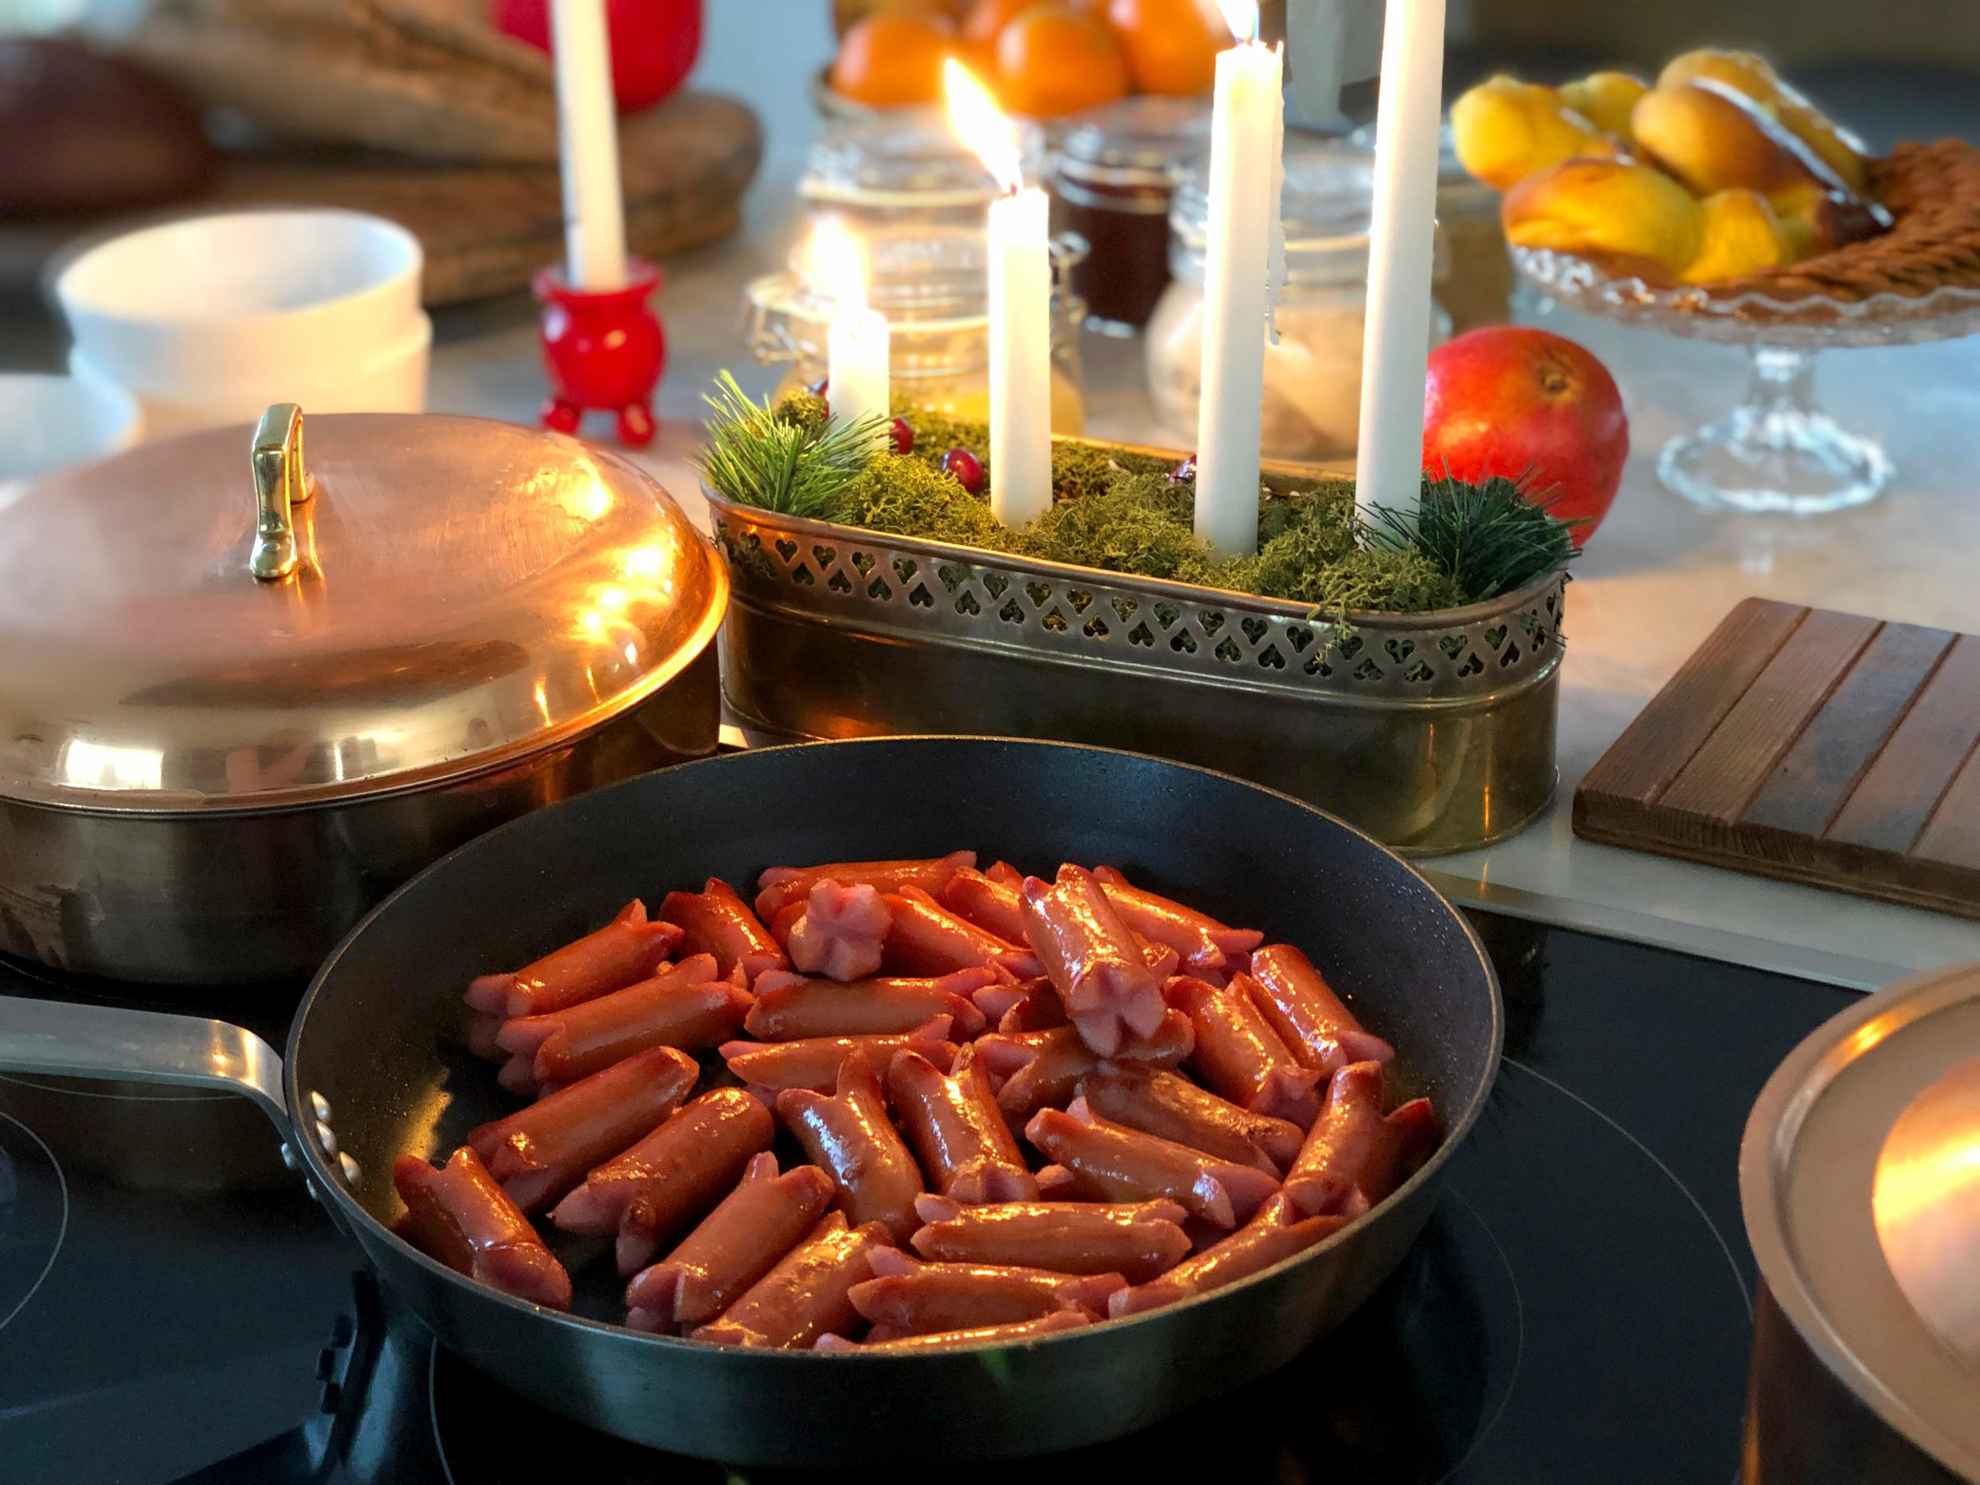 Close up of a frying pan with prince sausages next to an advent candlestick with lit candles and a copper pot. Fruits in the background.